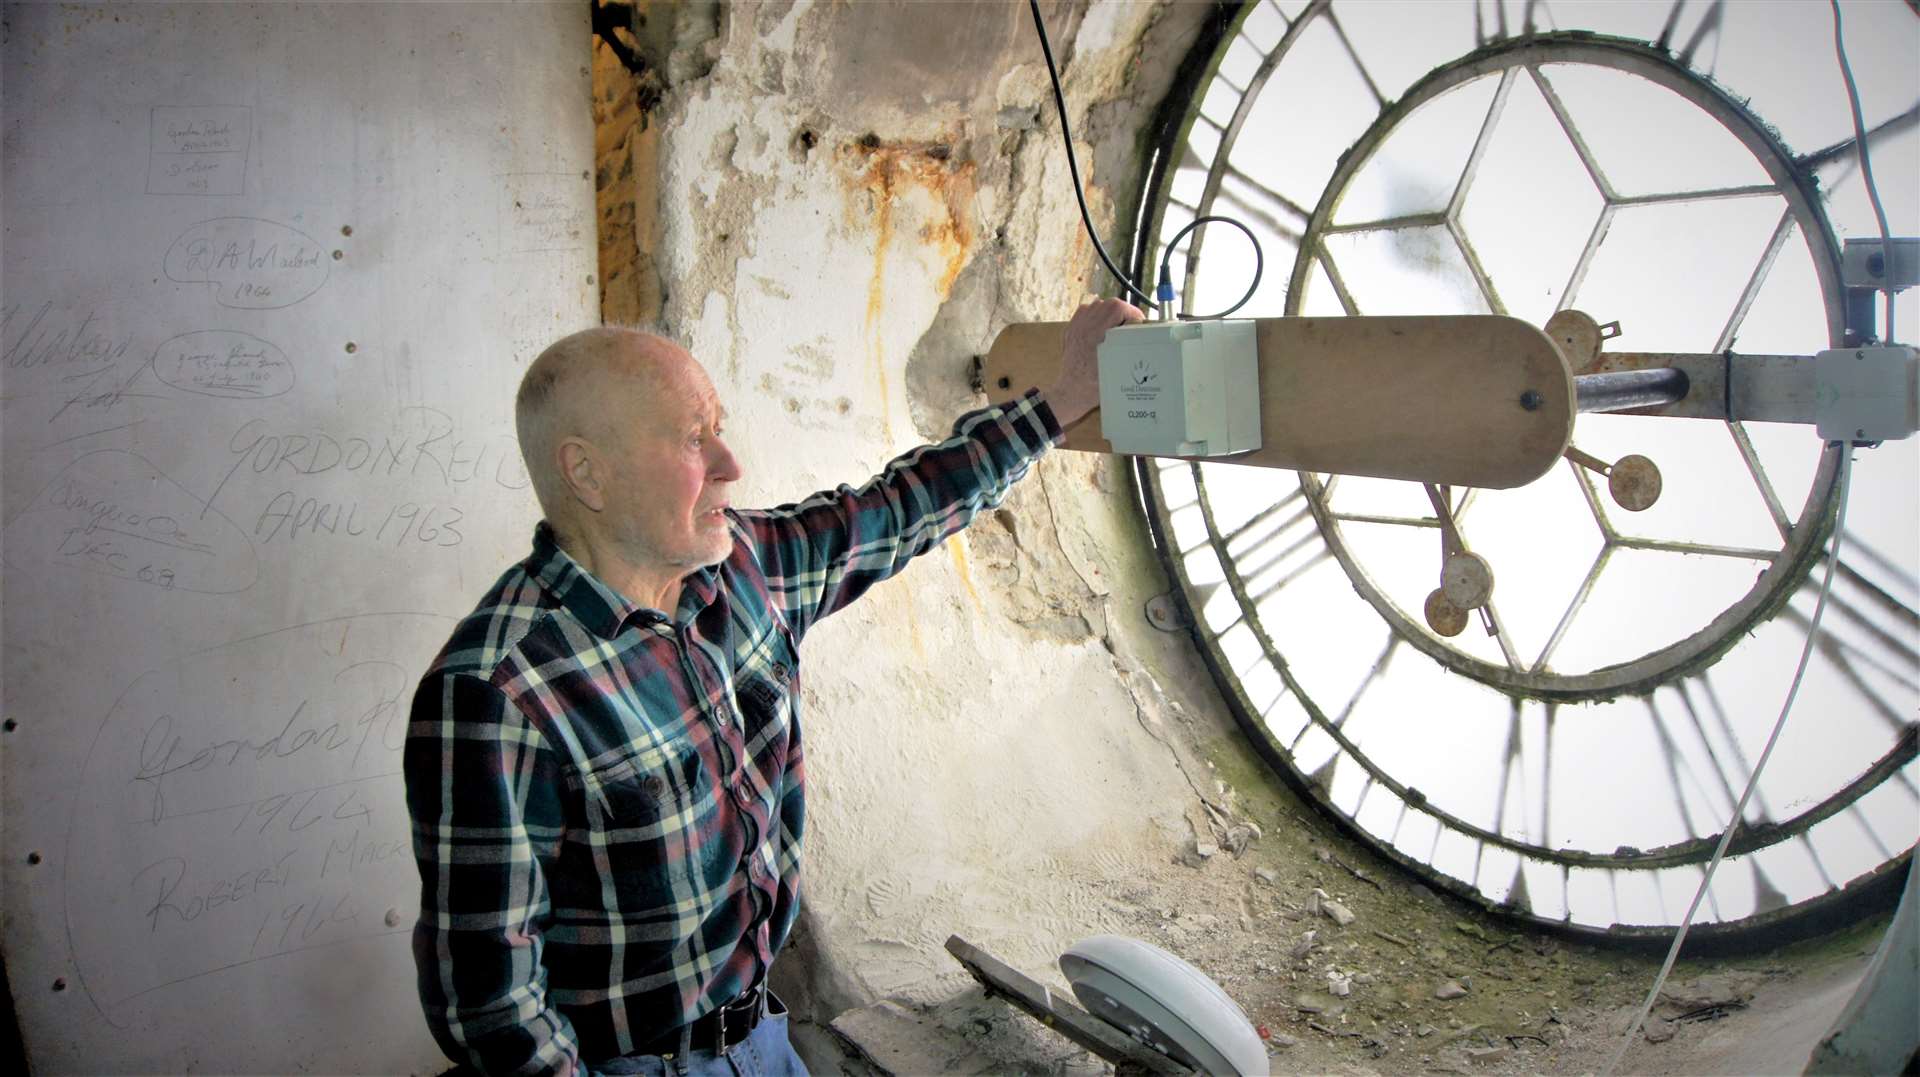 Bill Brown regularly wound up the clock mechanism for many years until it went electric two years ago. Picture: DGS